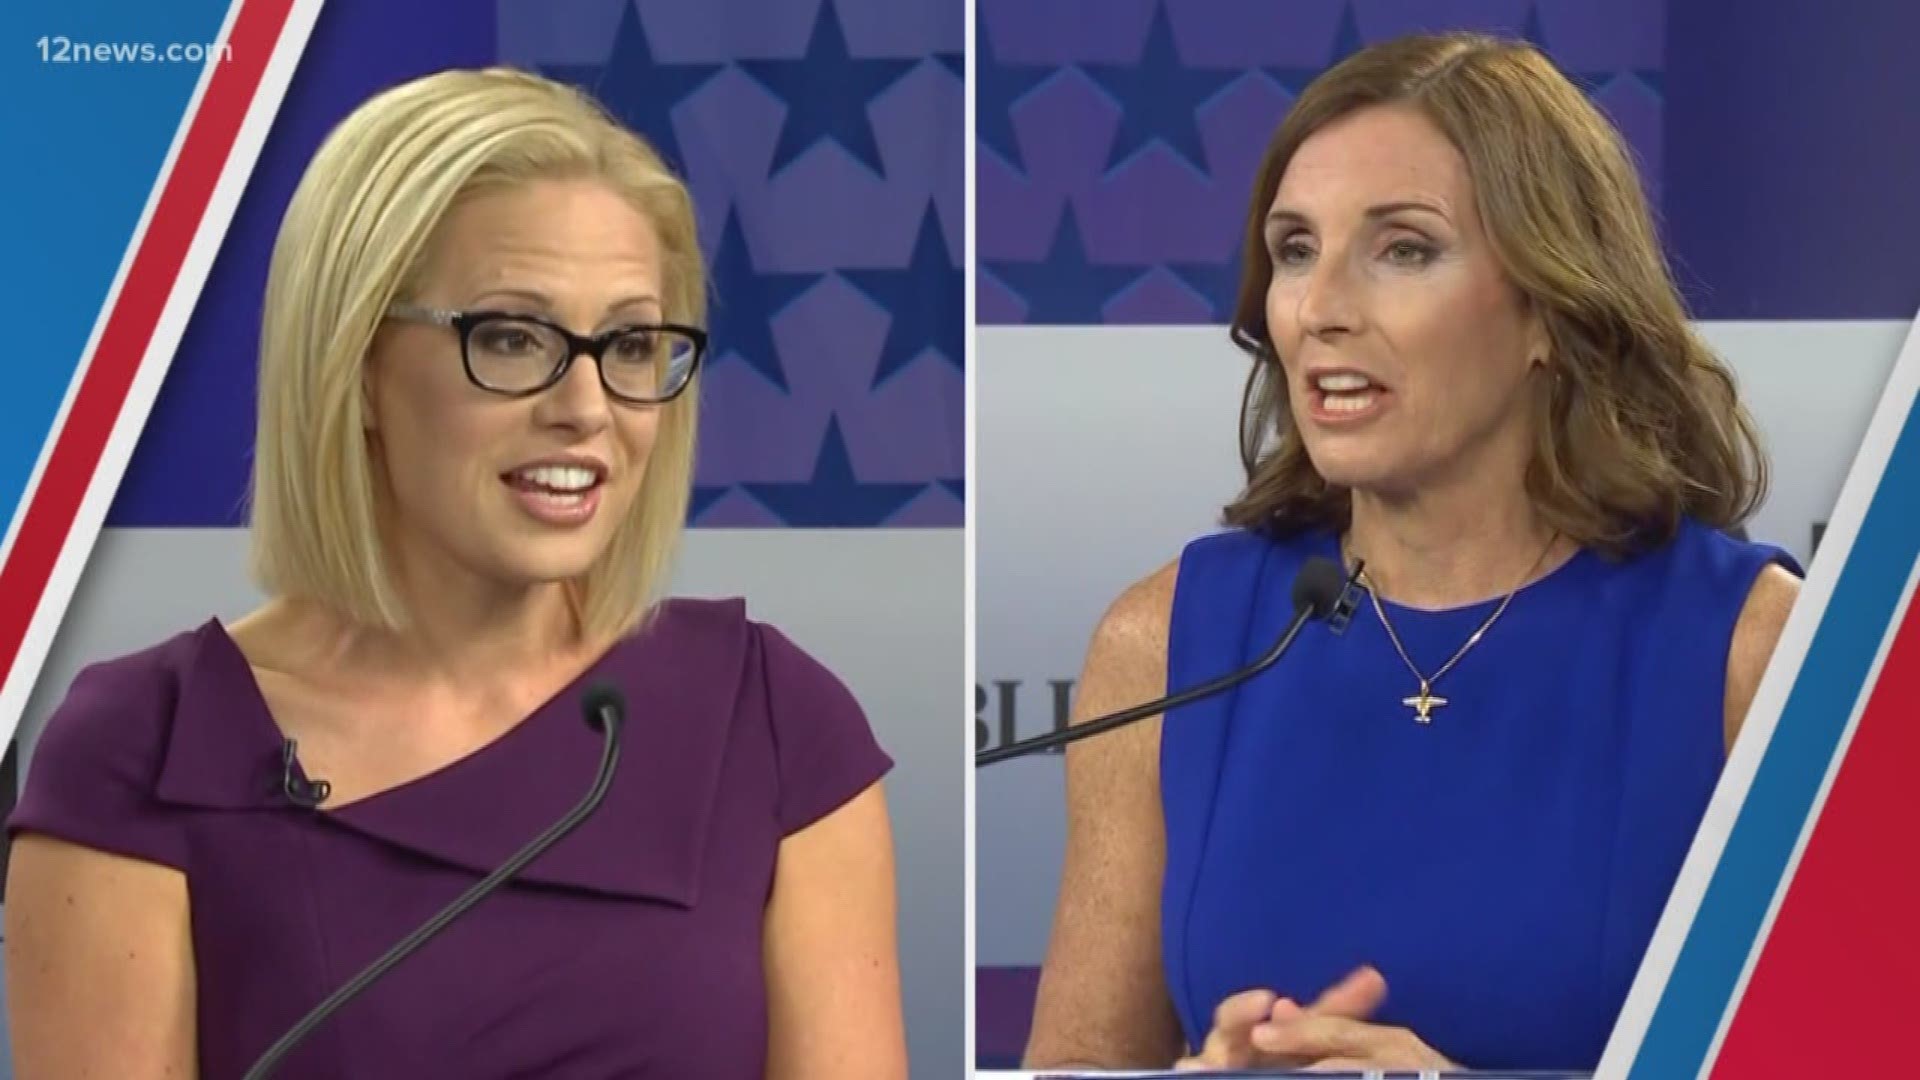 There was speculation right up to the last minute that Senator Kyrsten Sinema would vote "not guilty." Ultimately, both she and McSally voted along party lines.